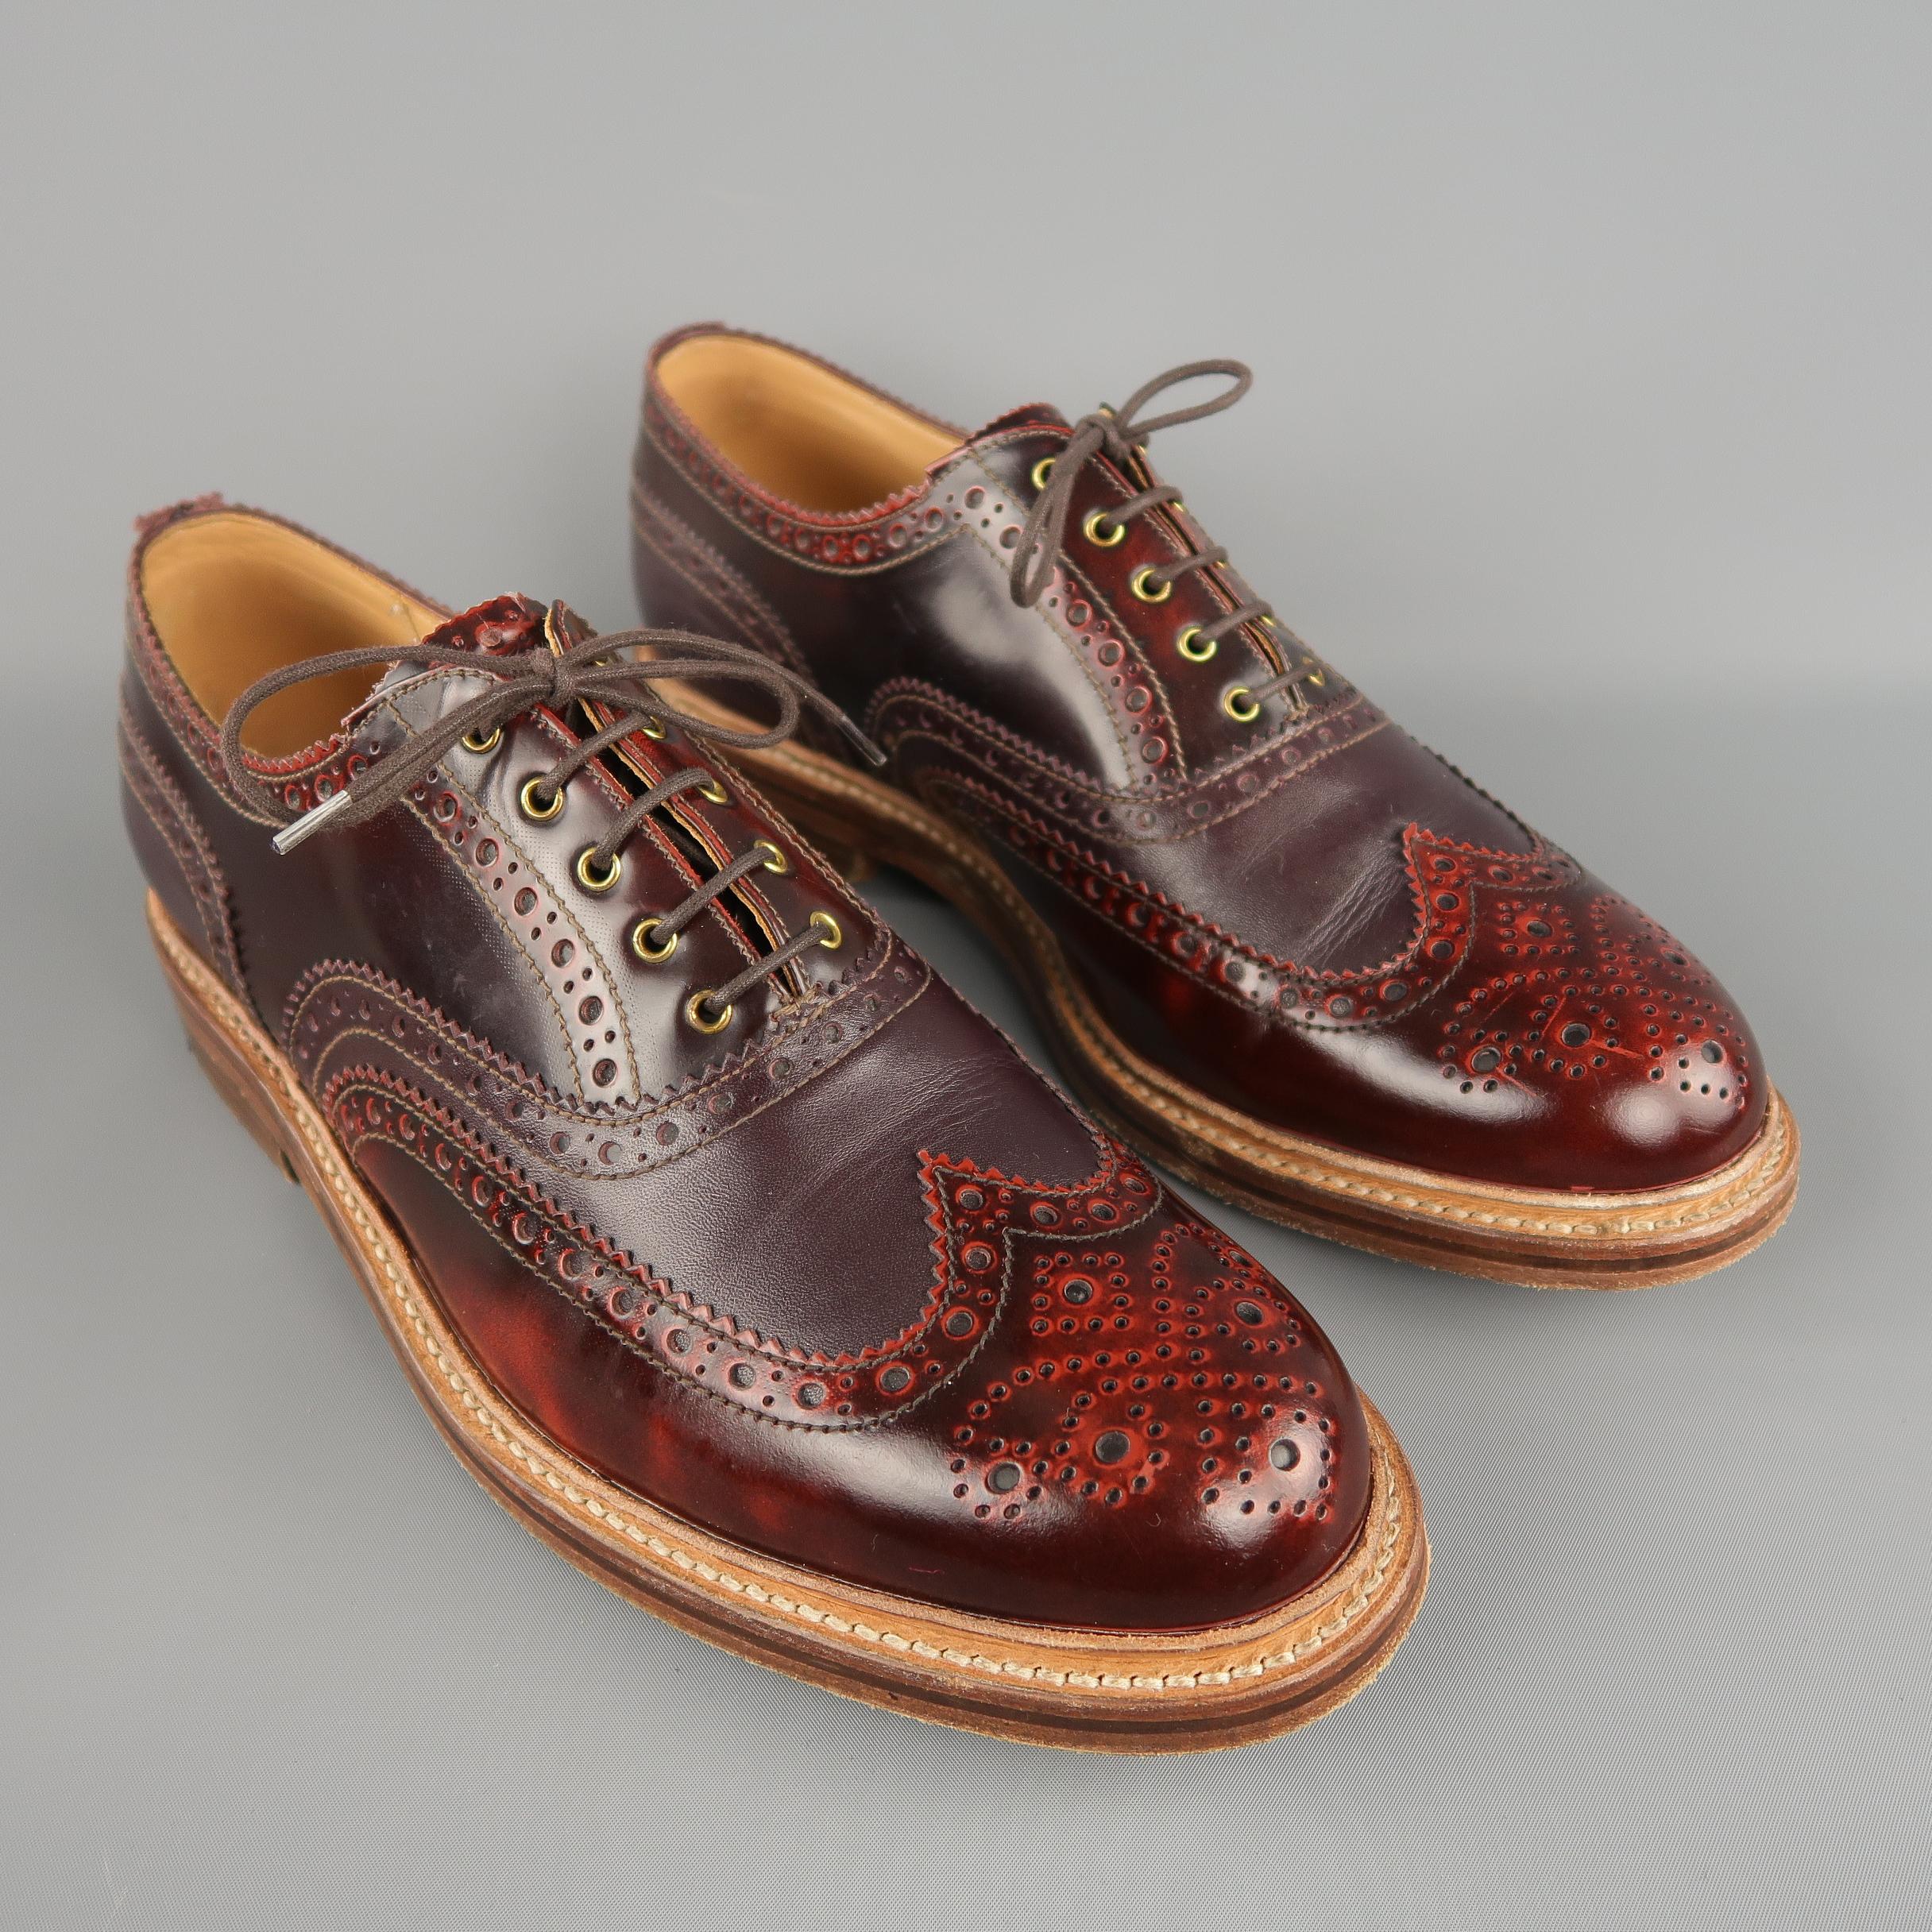 GRENSON brogue shoes come in burgundy tones of leather, wingtip-style and perforations. 

Made in England. 
Excellent Pre-Owned Condition
Marked: 11 G UK
 
Measurements:
Outsole: 13 x 3 in.